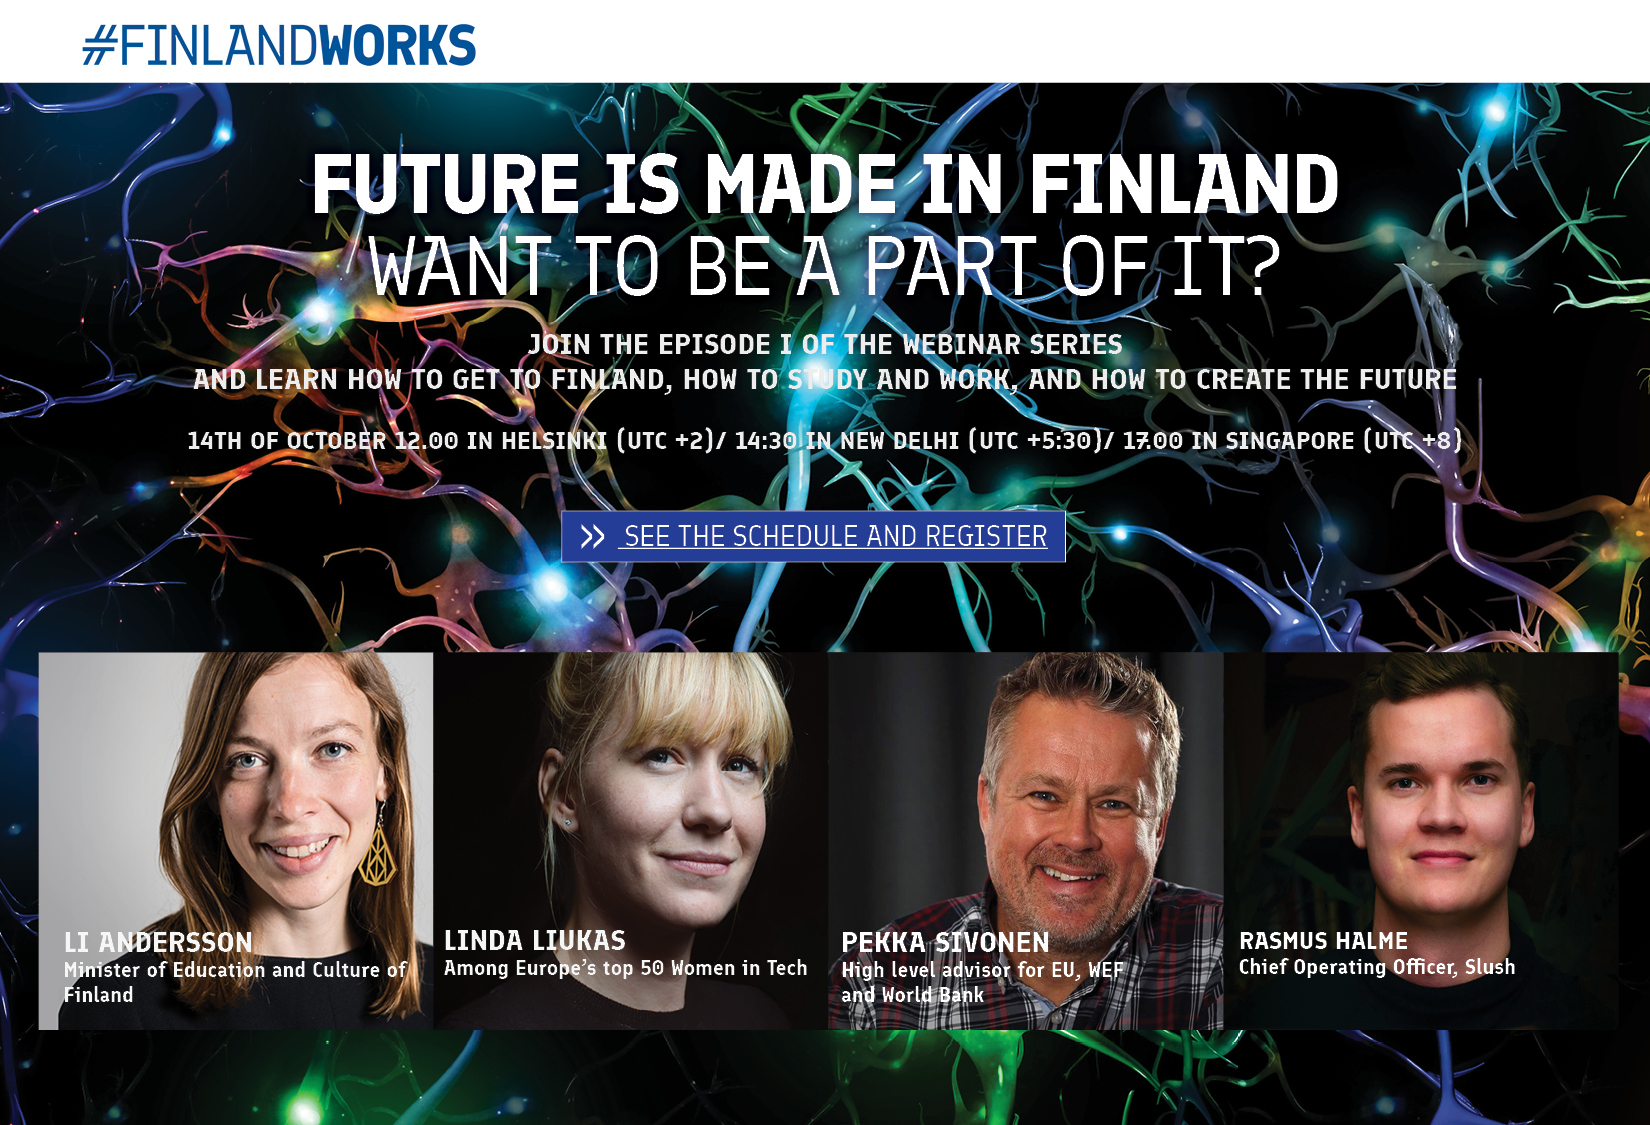 Future is Made in Finland - want to be part of it? Episode 1 on October 14 at 17:00 in Singapore (UTC +8)